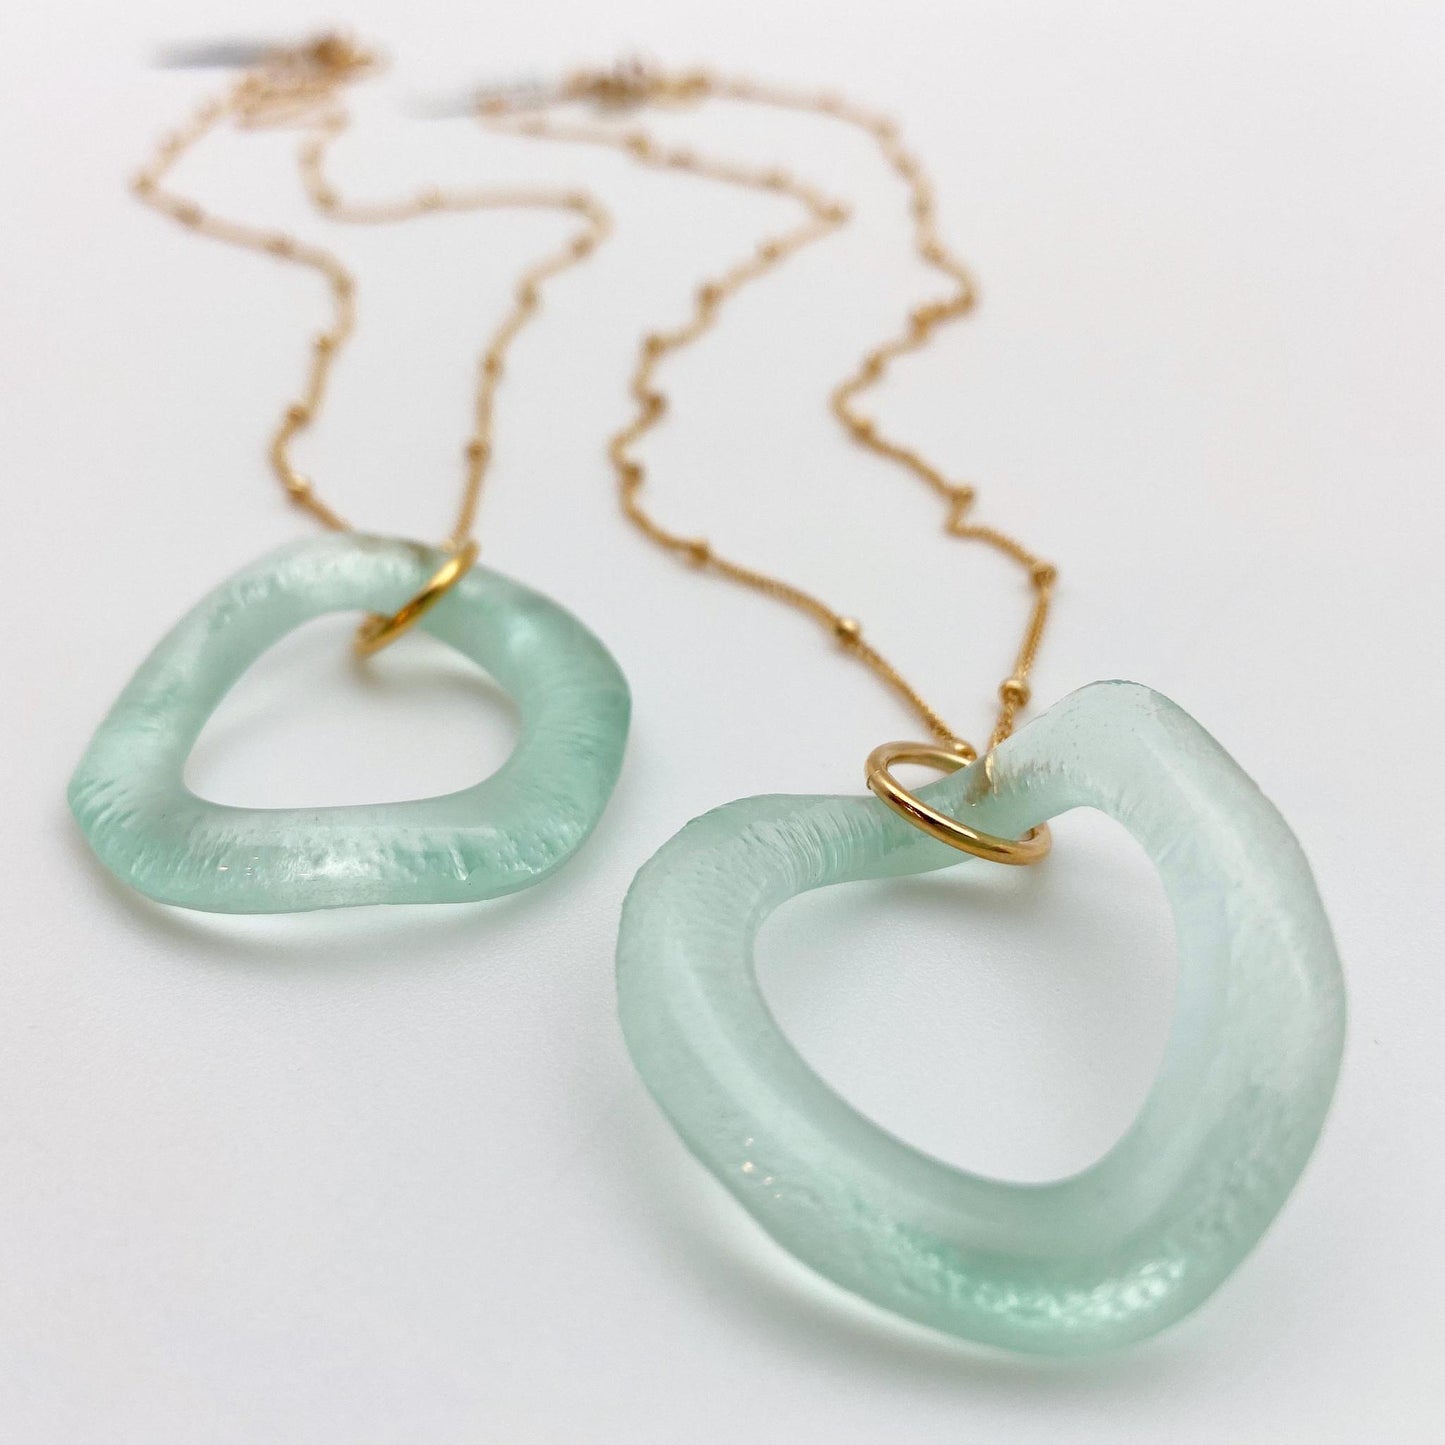 Necklace - Wavy Circle - Reclaimed Glass